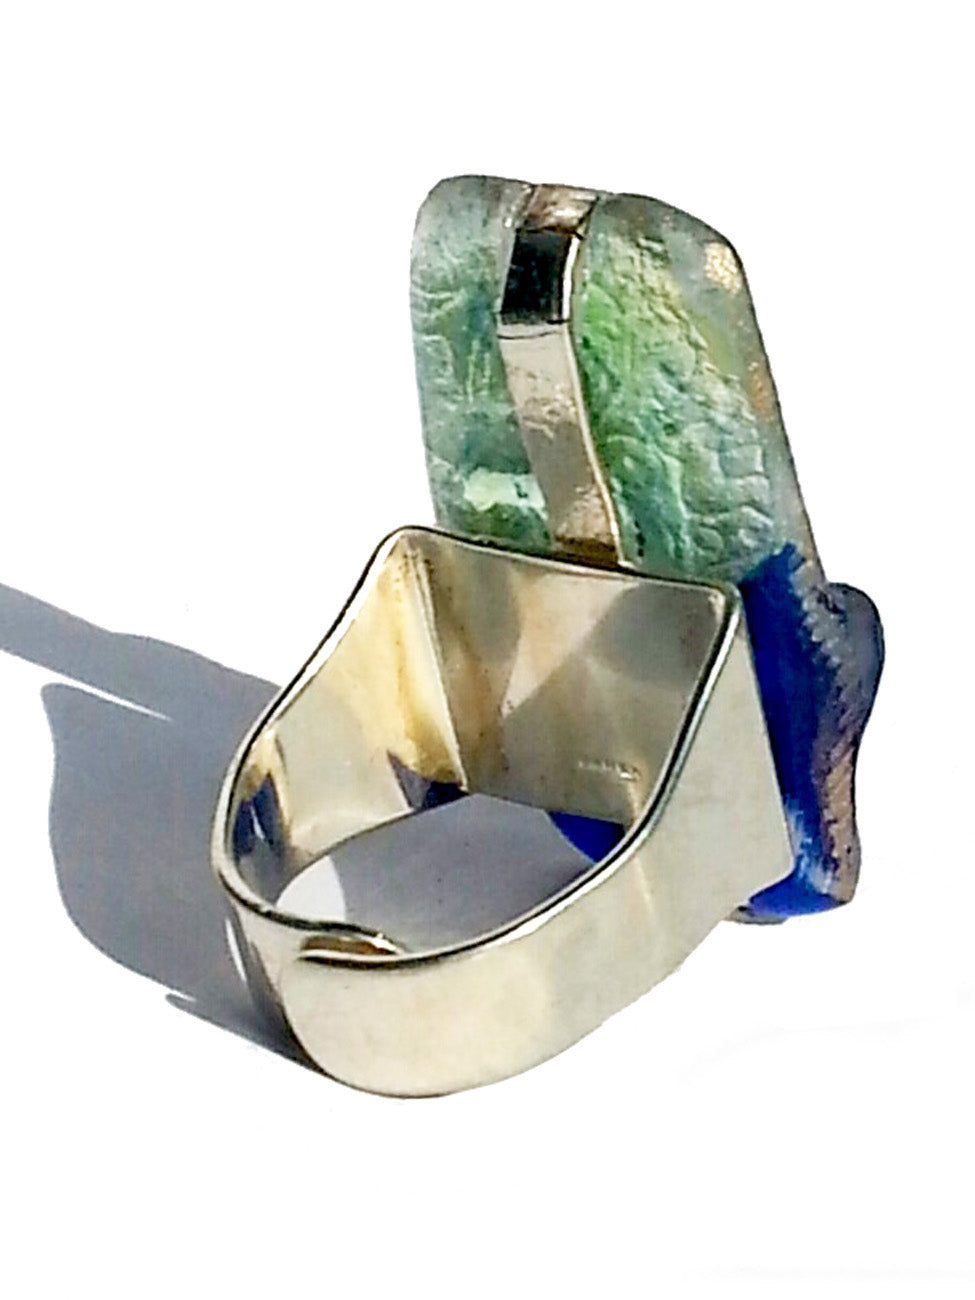 Ring Hand Cast French Glass Horse Blue Green Silver Plated Band